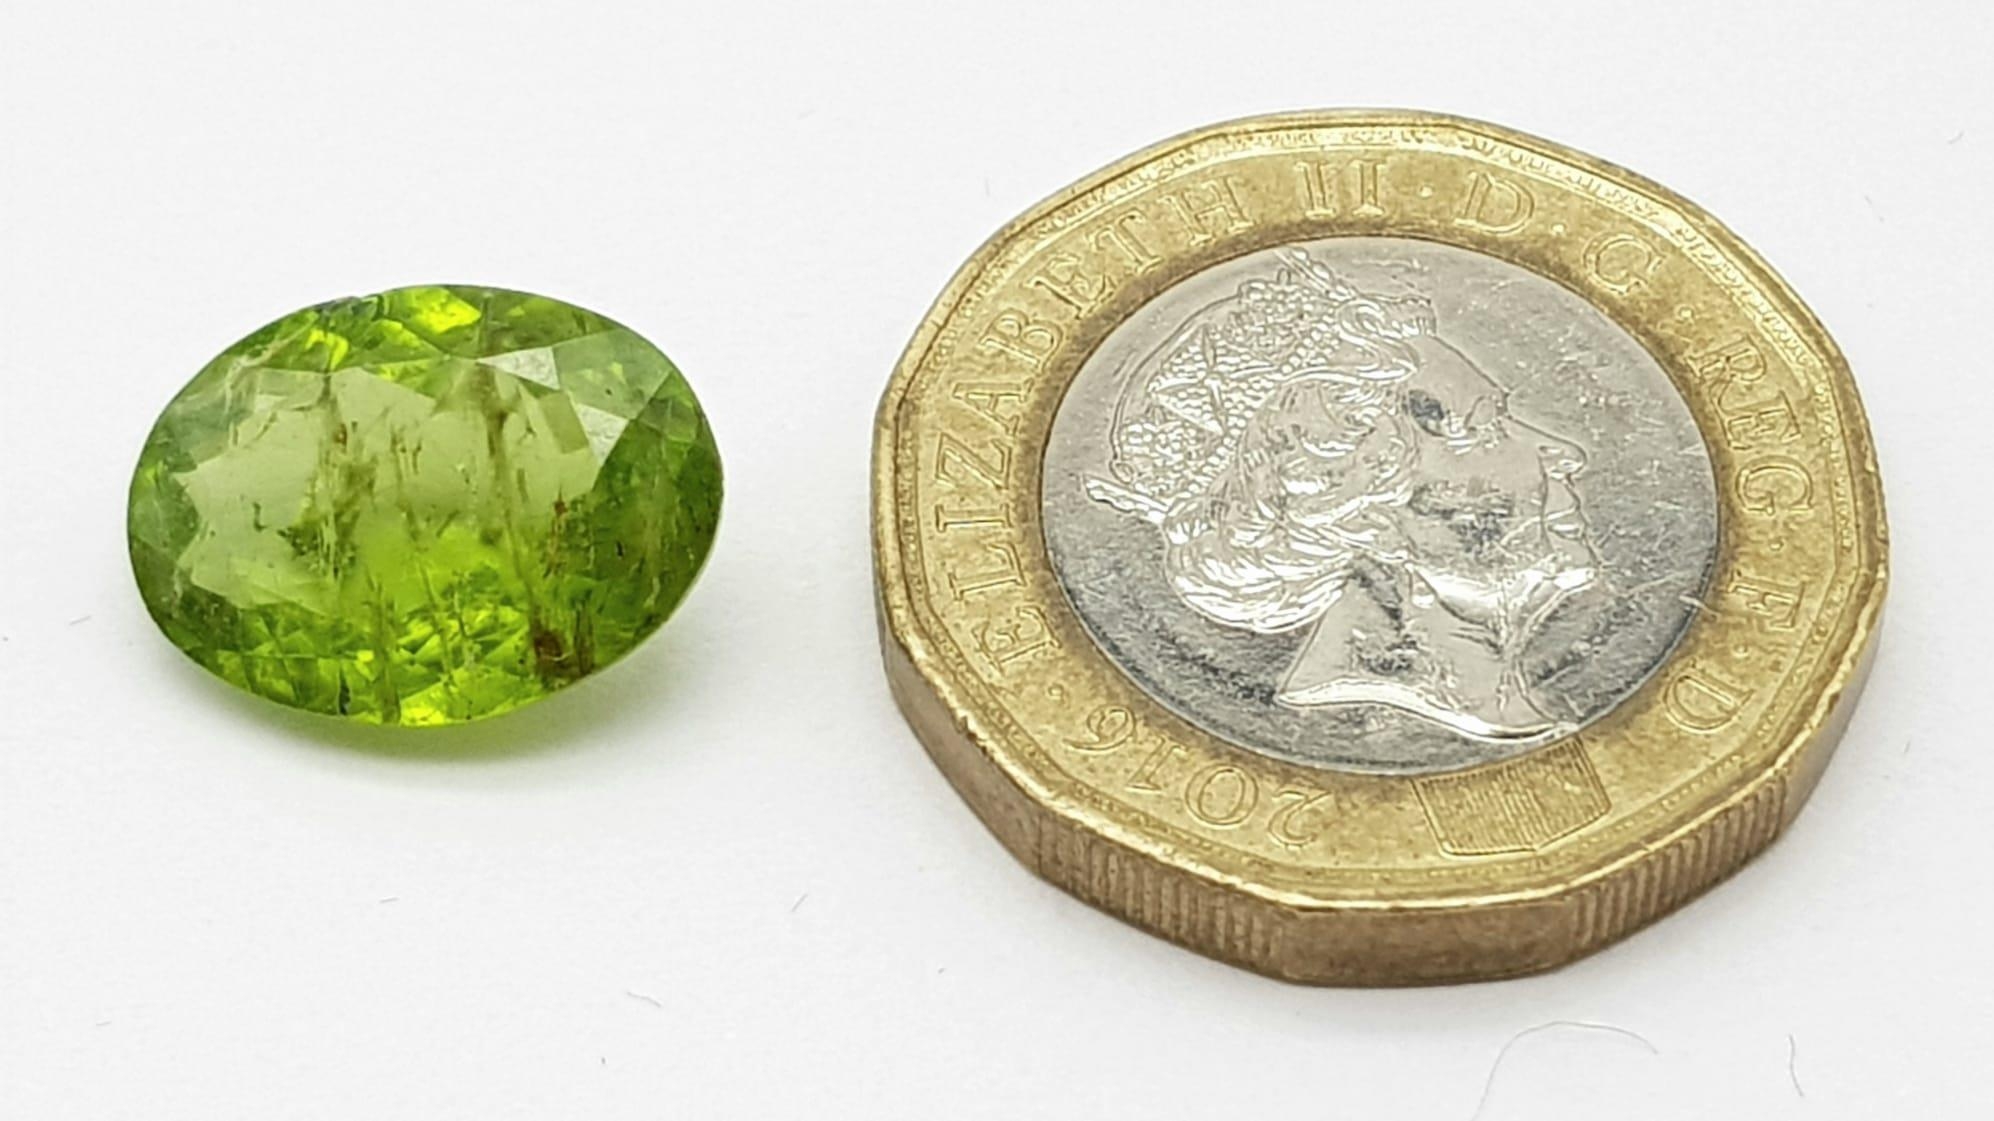 5.30 Ct Faceted Peridot. Olive Green. Oval Cut. Comes with GLI Certificate. - Image 4 of 5